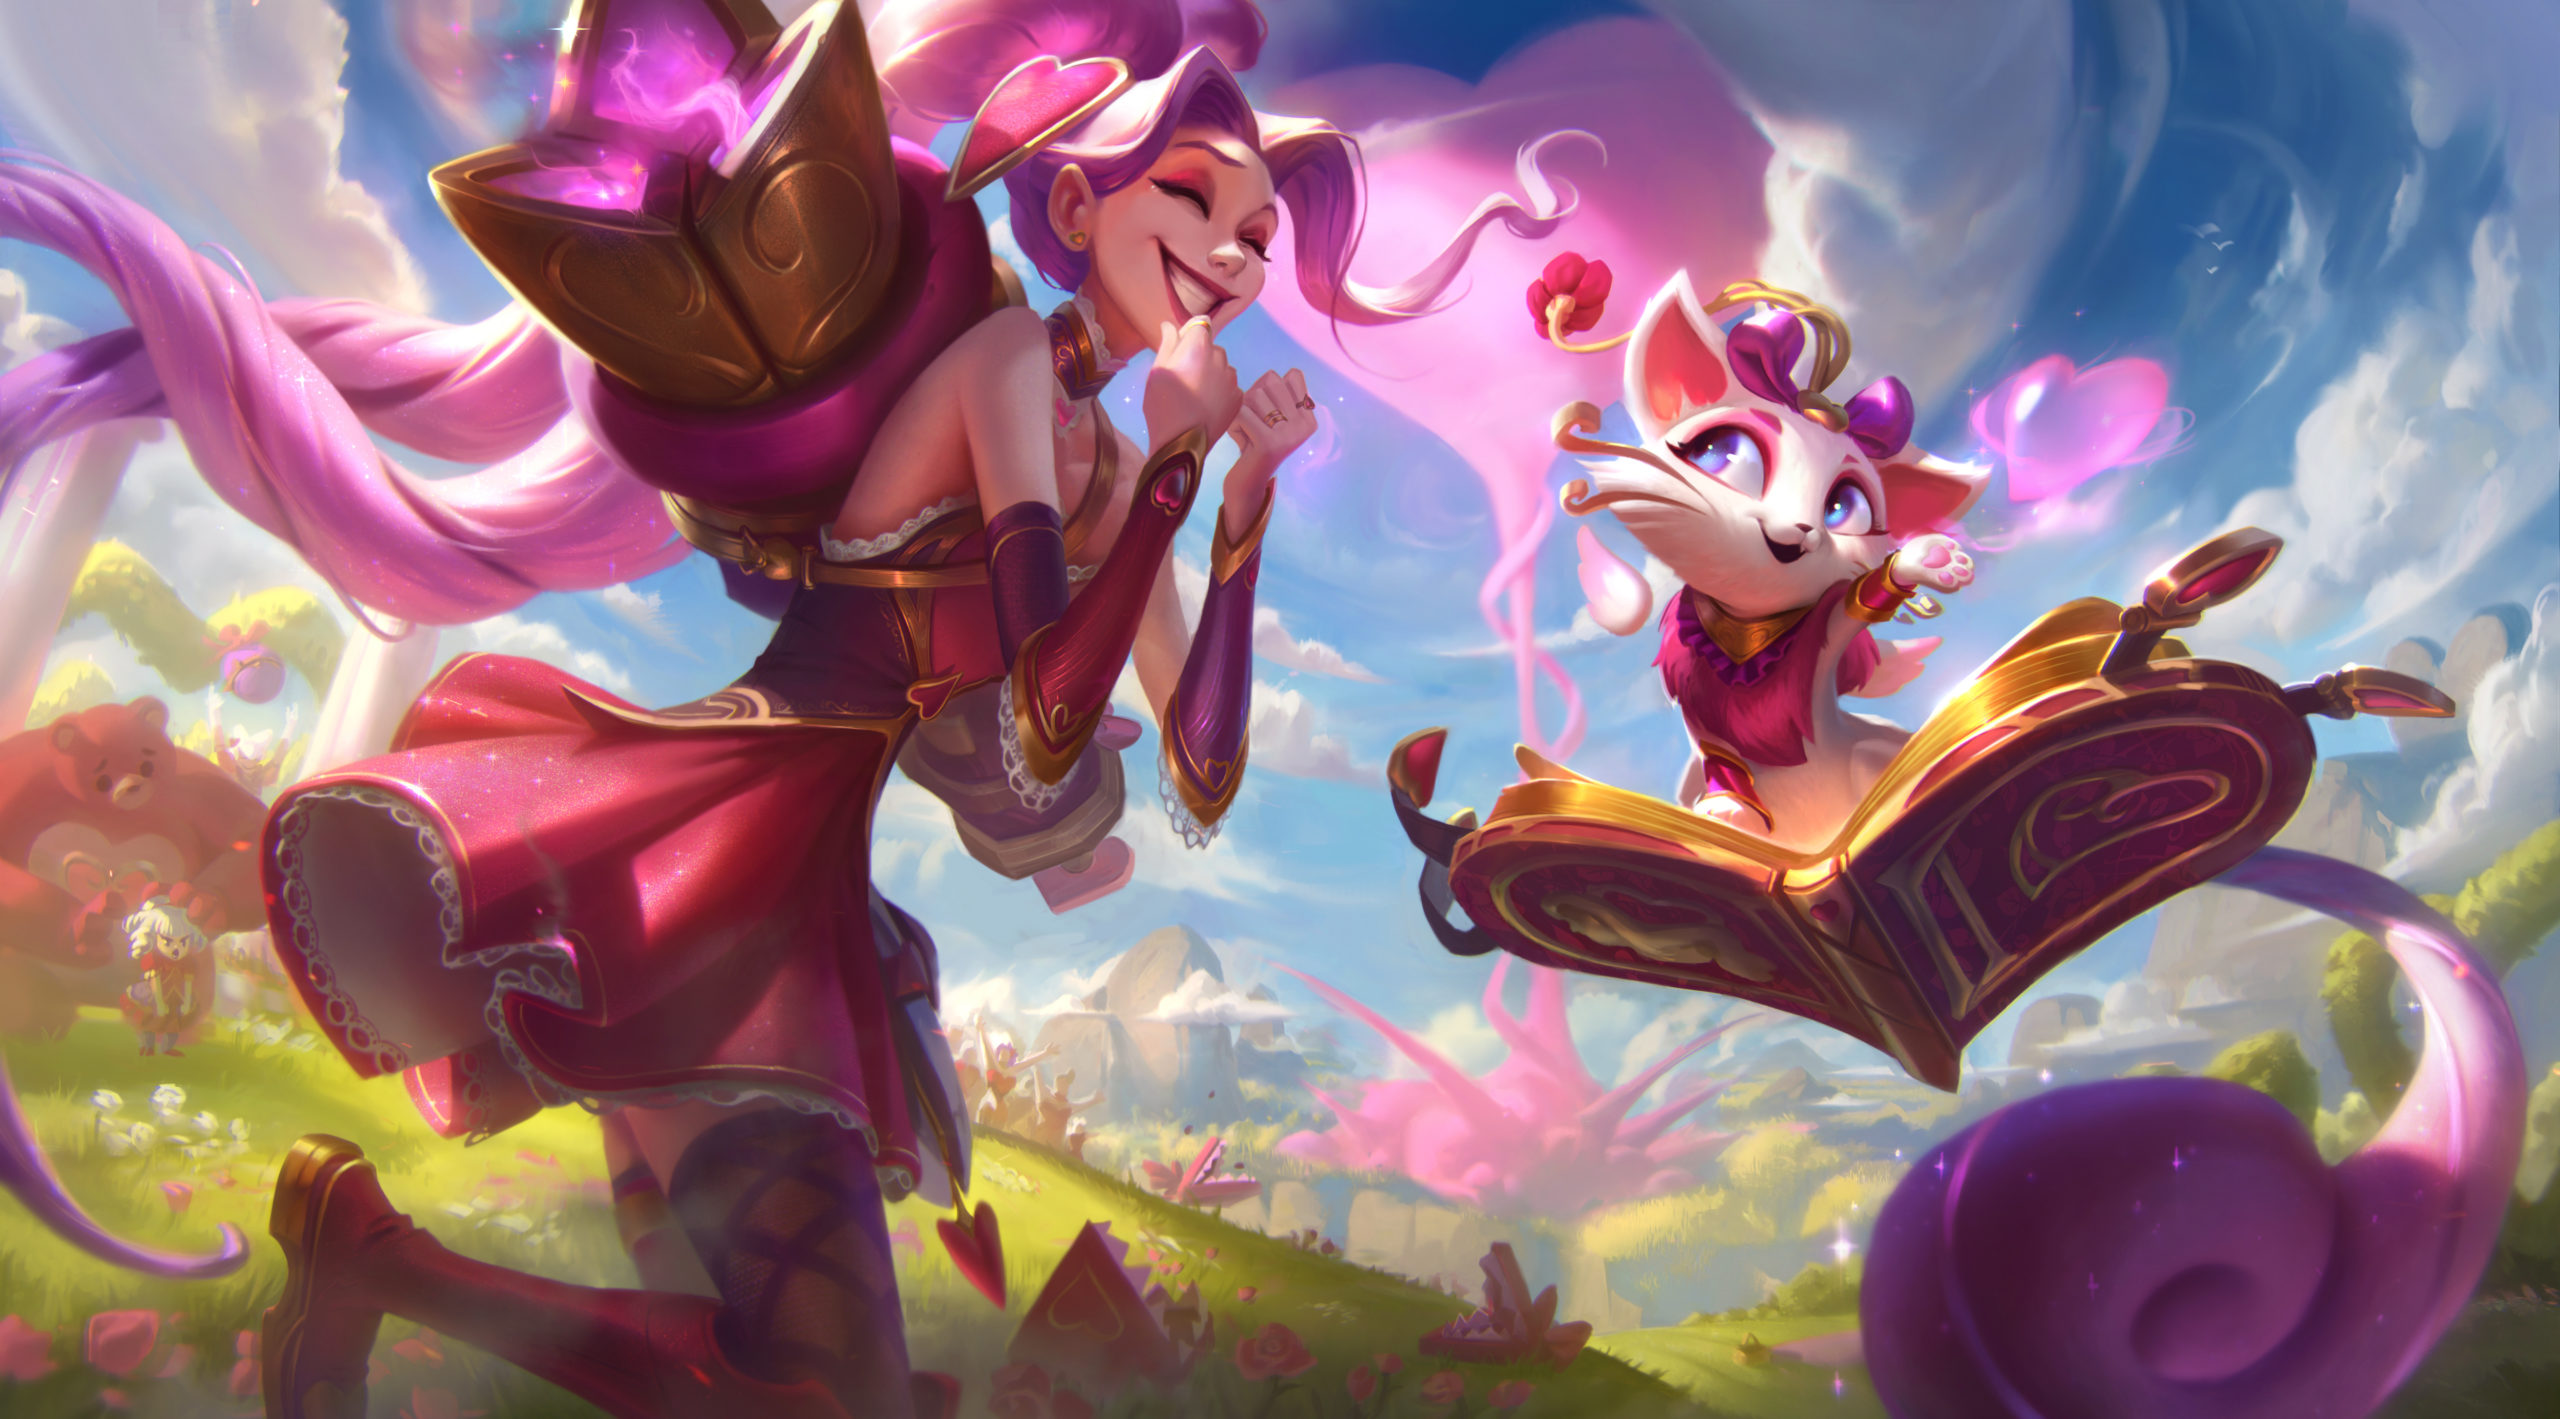 Prime Gaming on X: A new @LeagueOfLegends Mystery Skin Permanent